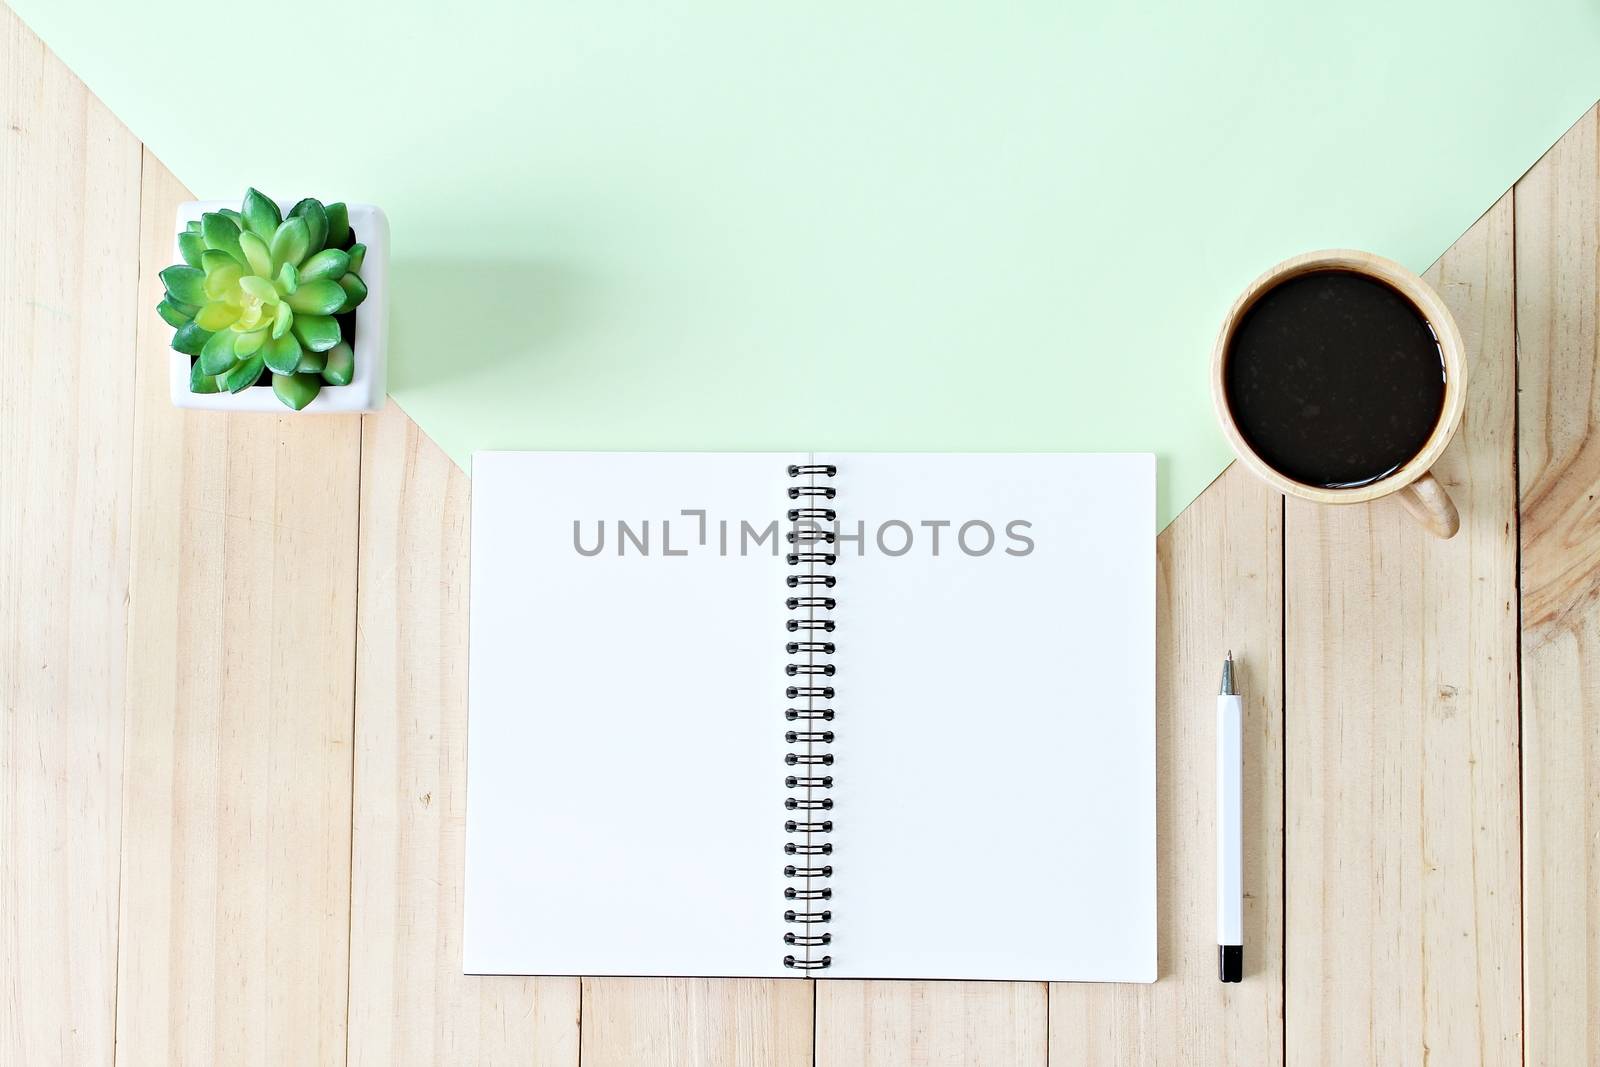 Still life, business, office supplies or education concept : Top view or flat lay of open notebook paper with blank pages and coffee cup on wooden background, ready for adding or mock up